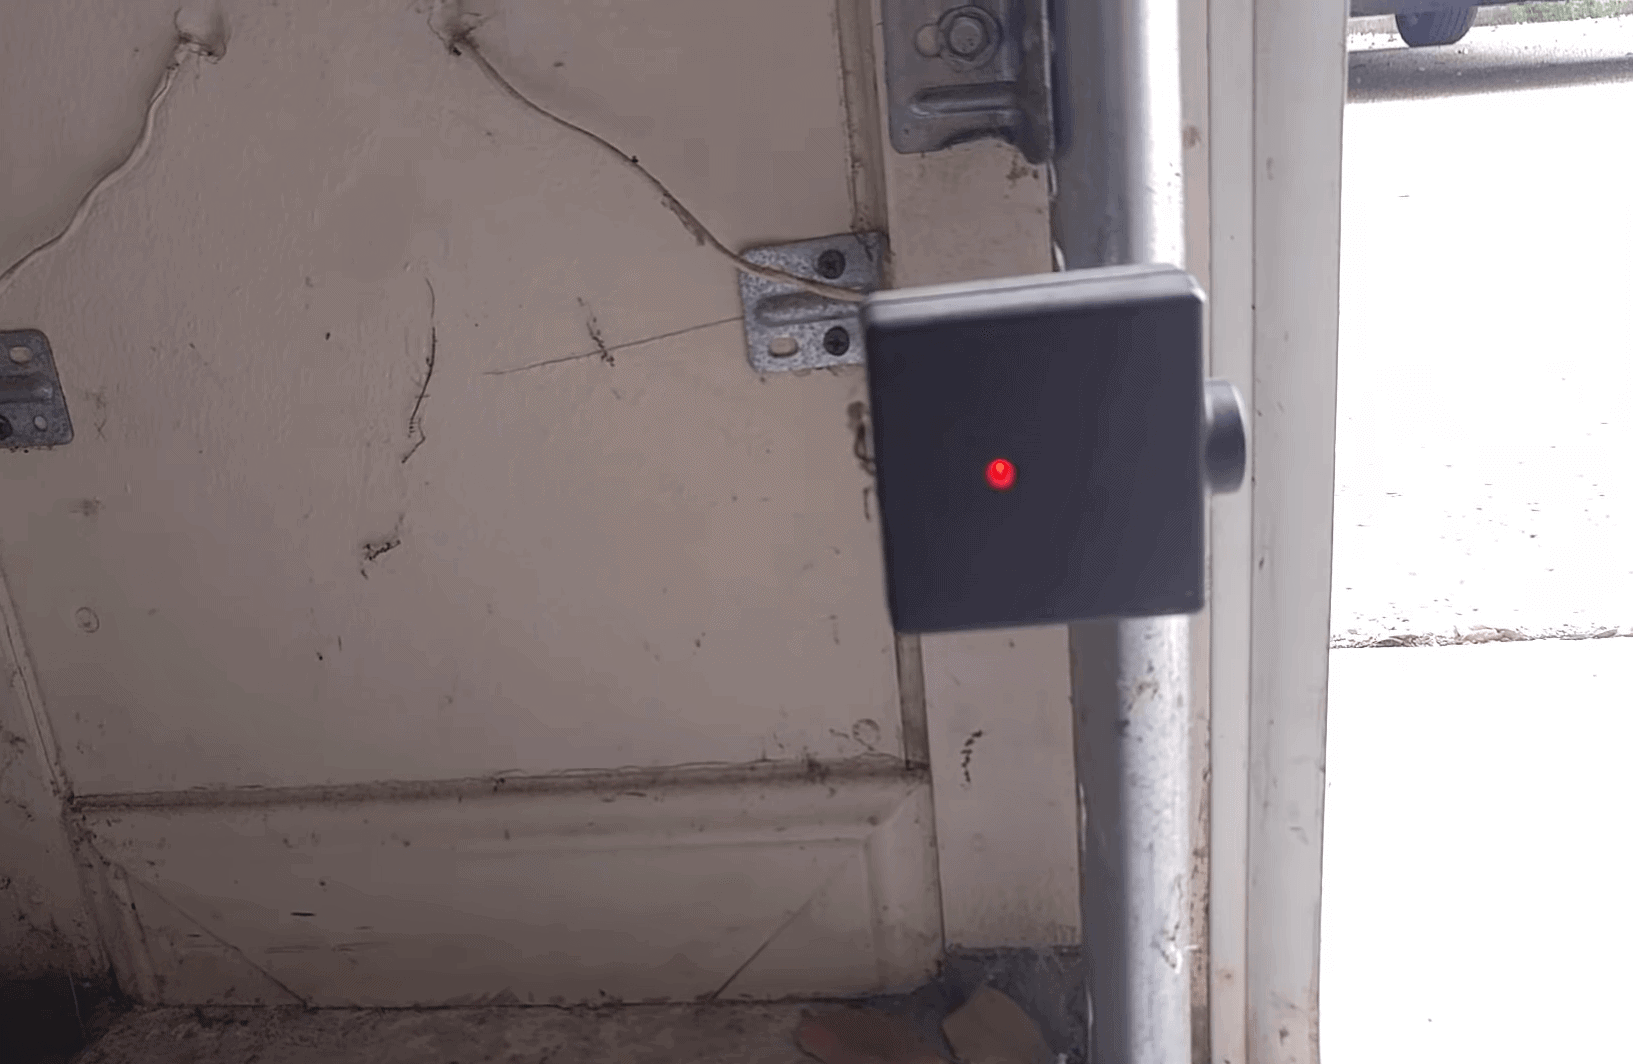 Troubleshooting a Flashing Red Light on Your Genie Garage Door Opener: Decoding the Mystery